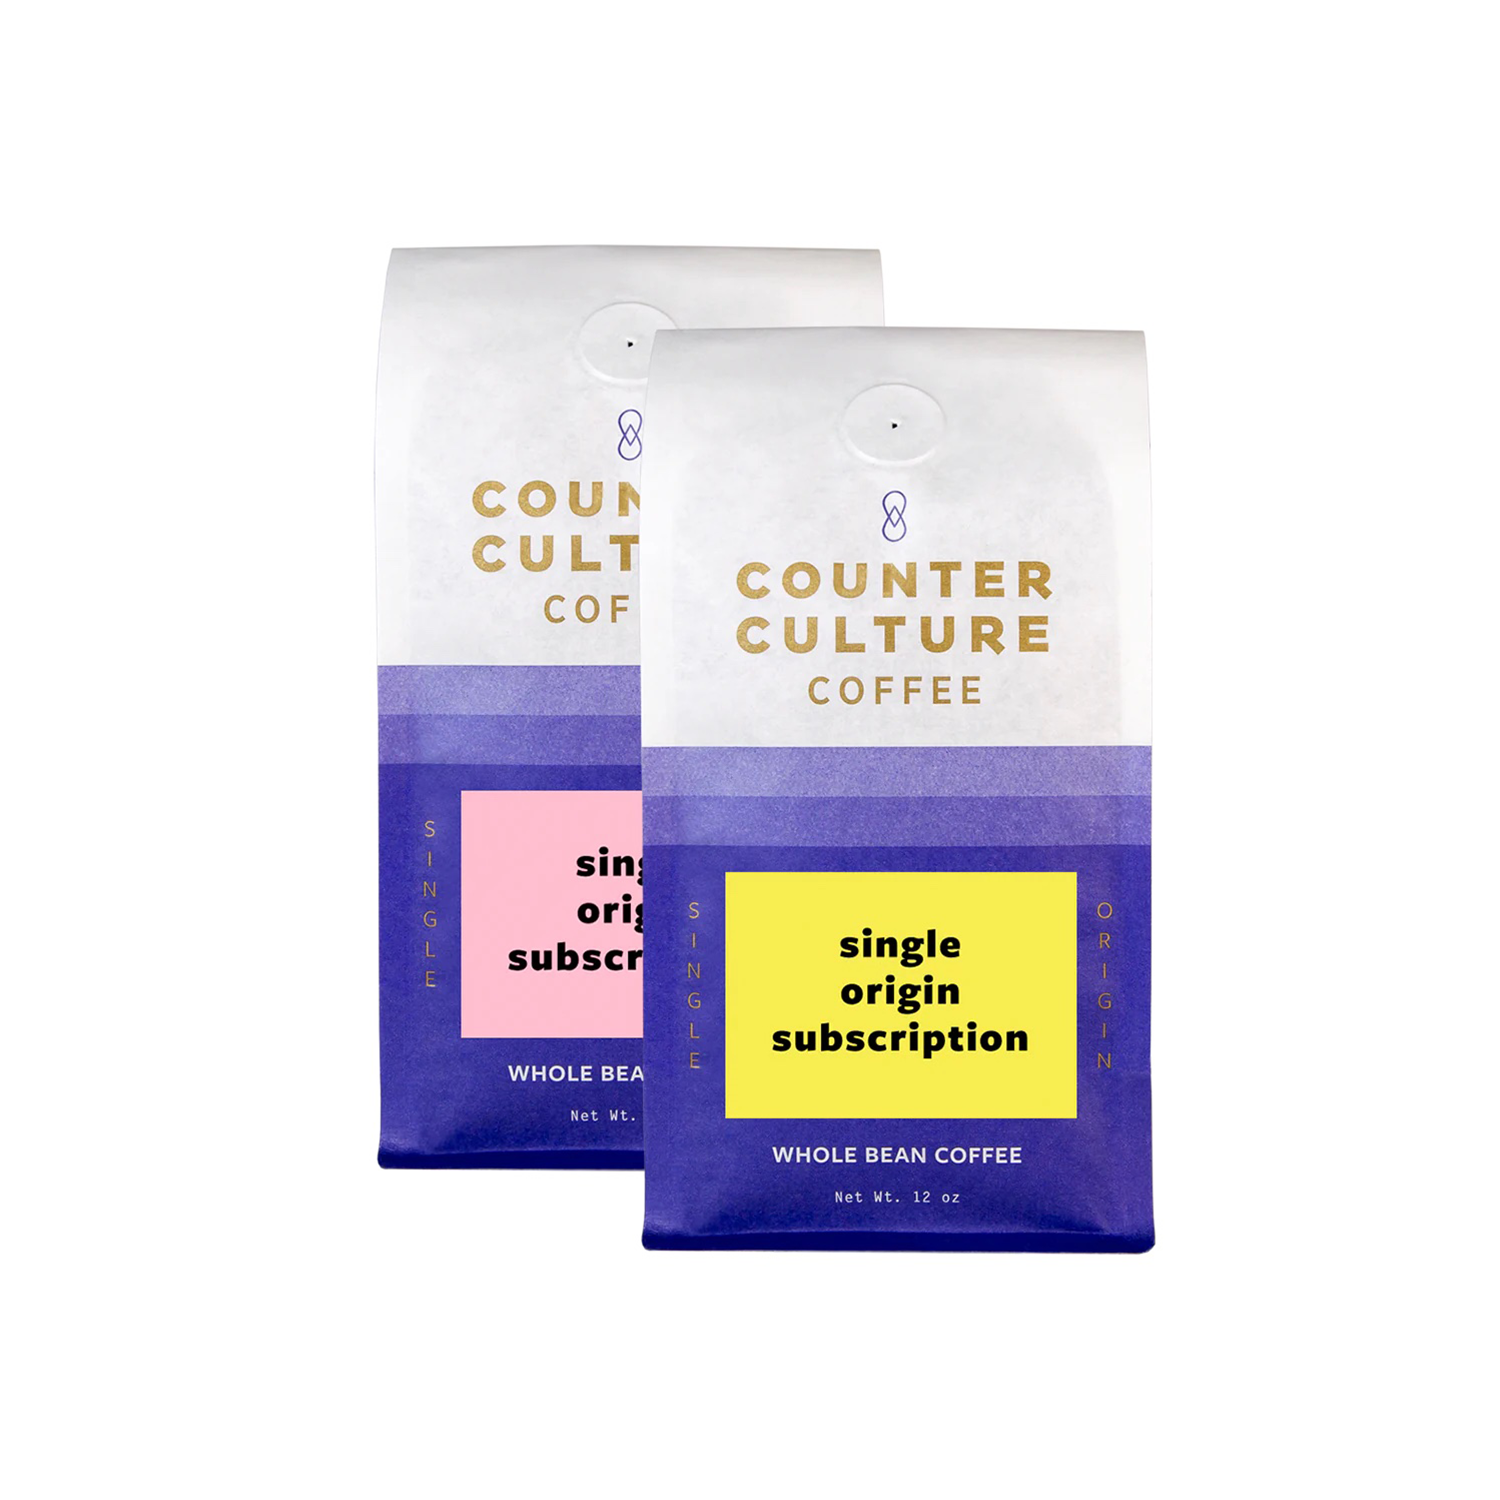 two bags of counter culture coffee bags